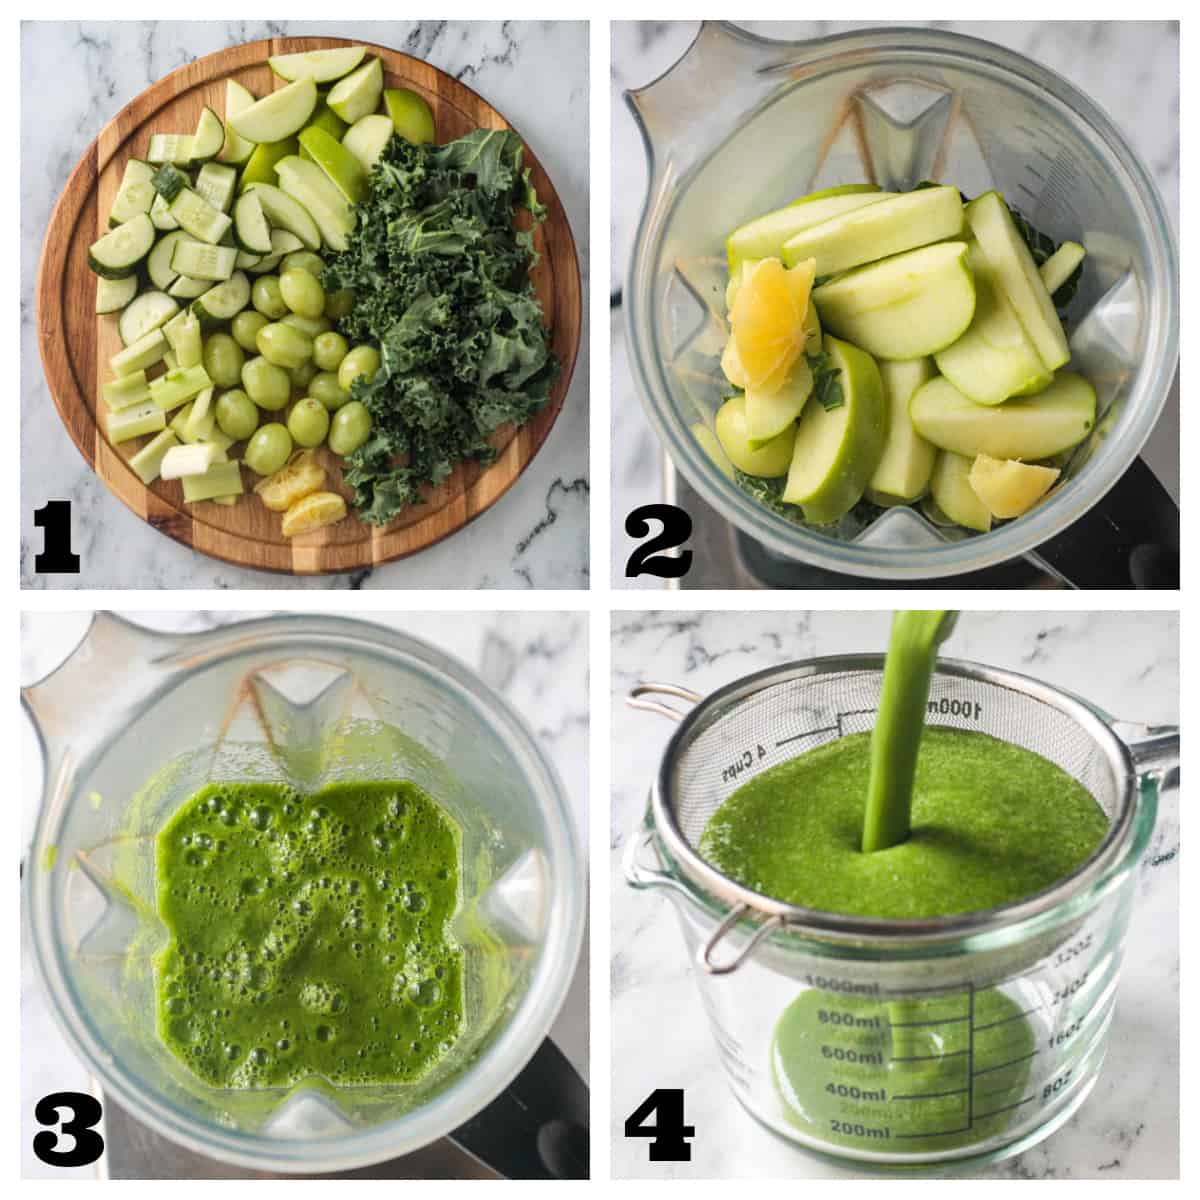 4 photo collage of chopped veggies, ingredients in blender, puréed juice, and straining juice.